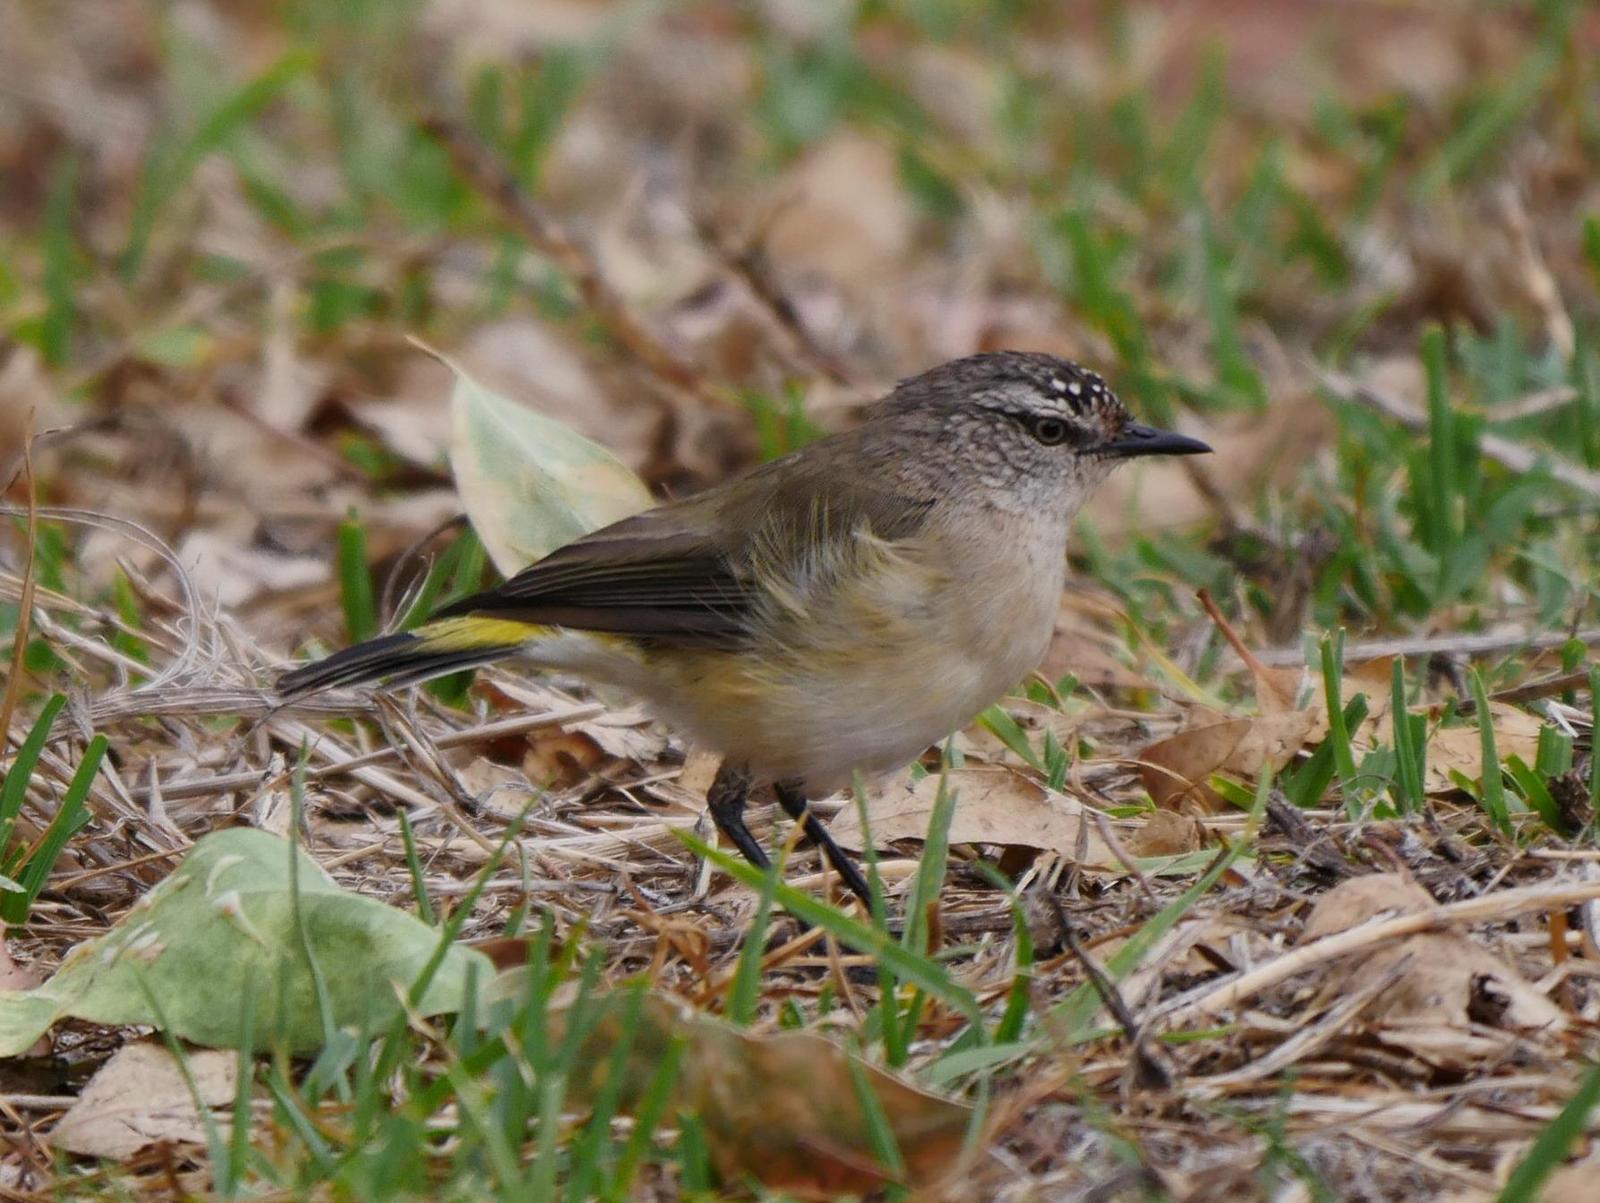 Yellow-rumped Thornbill Photo by Peter Lowe